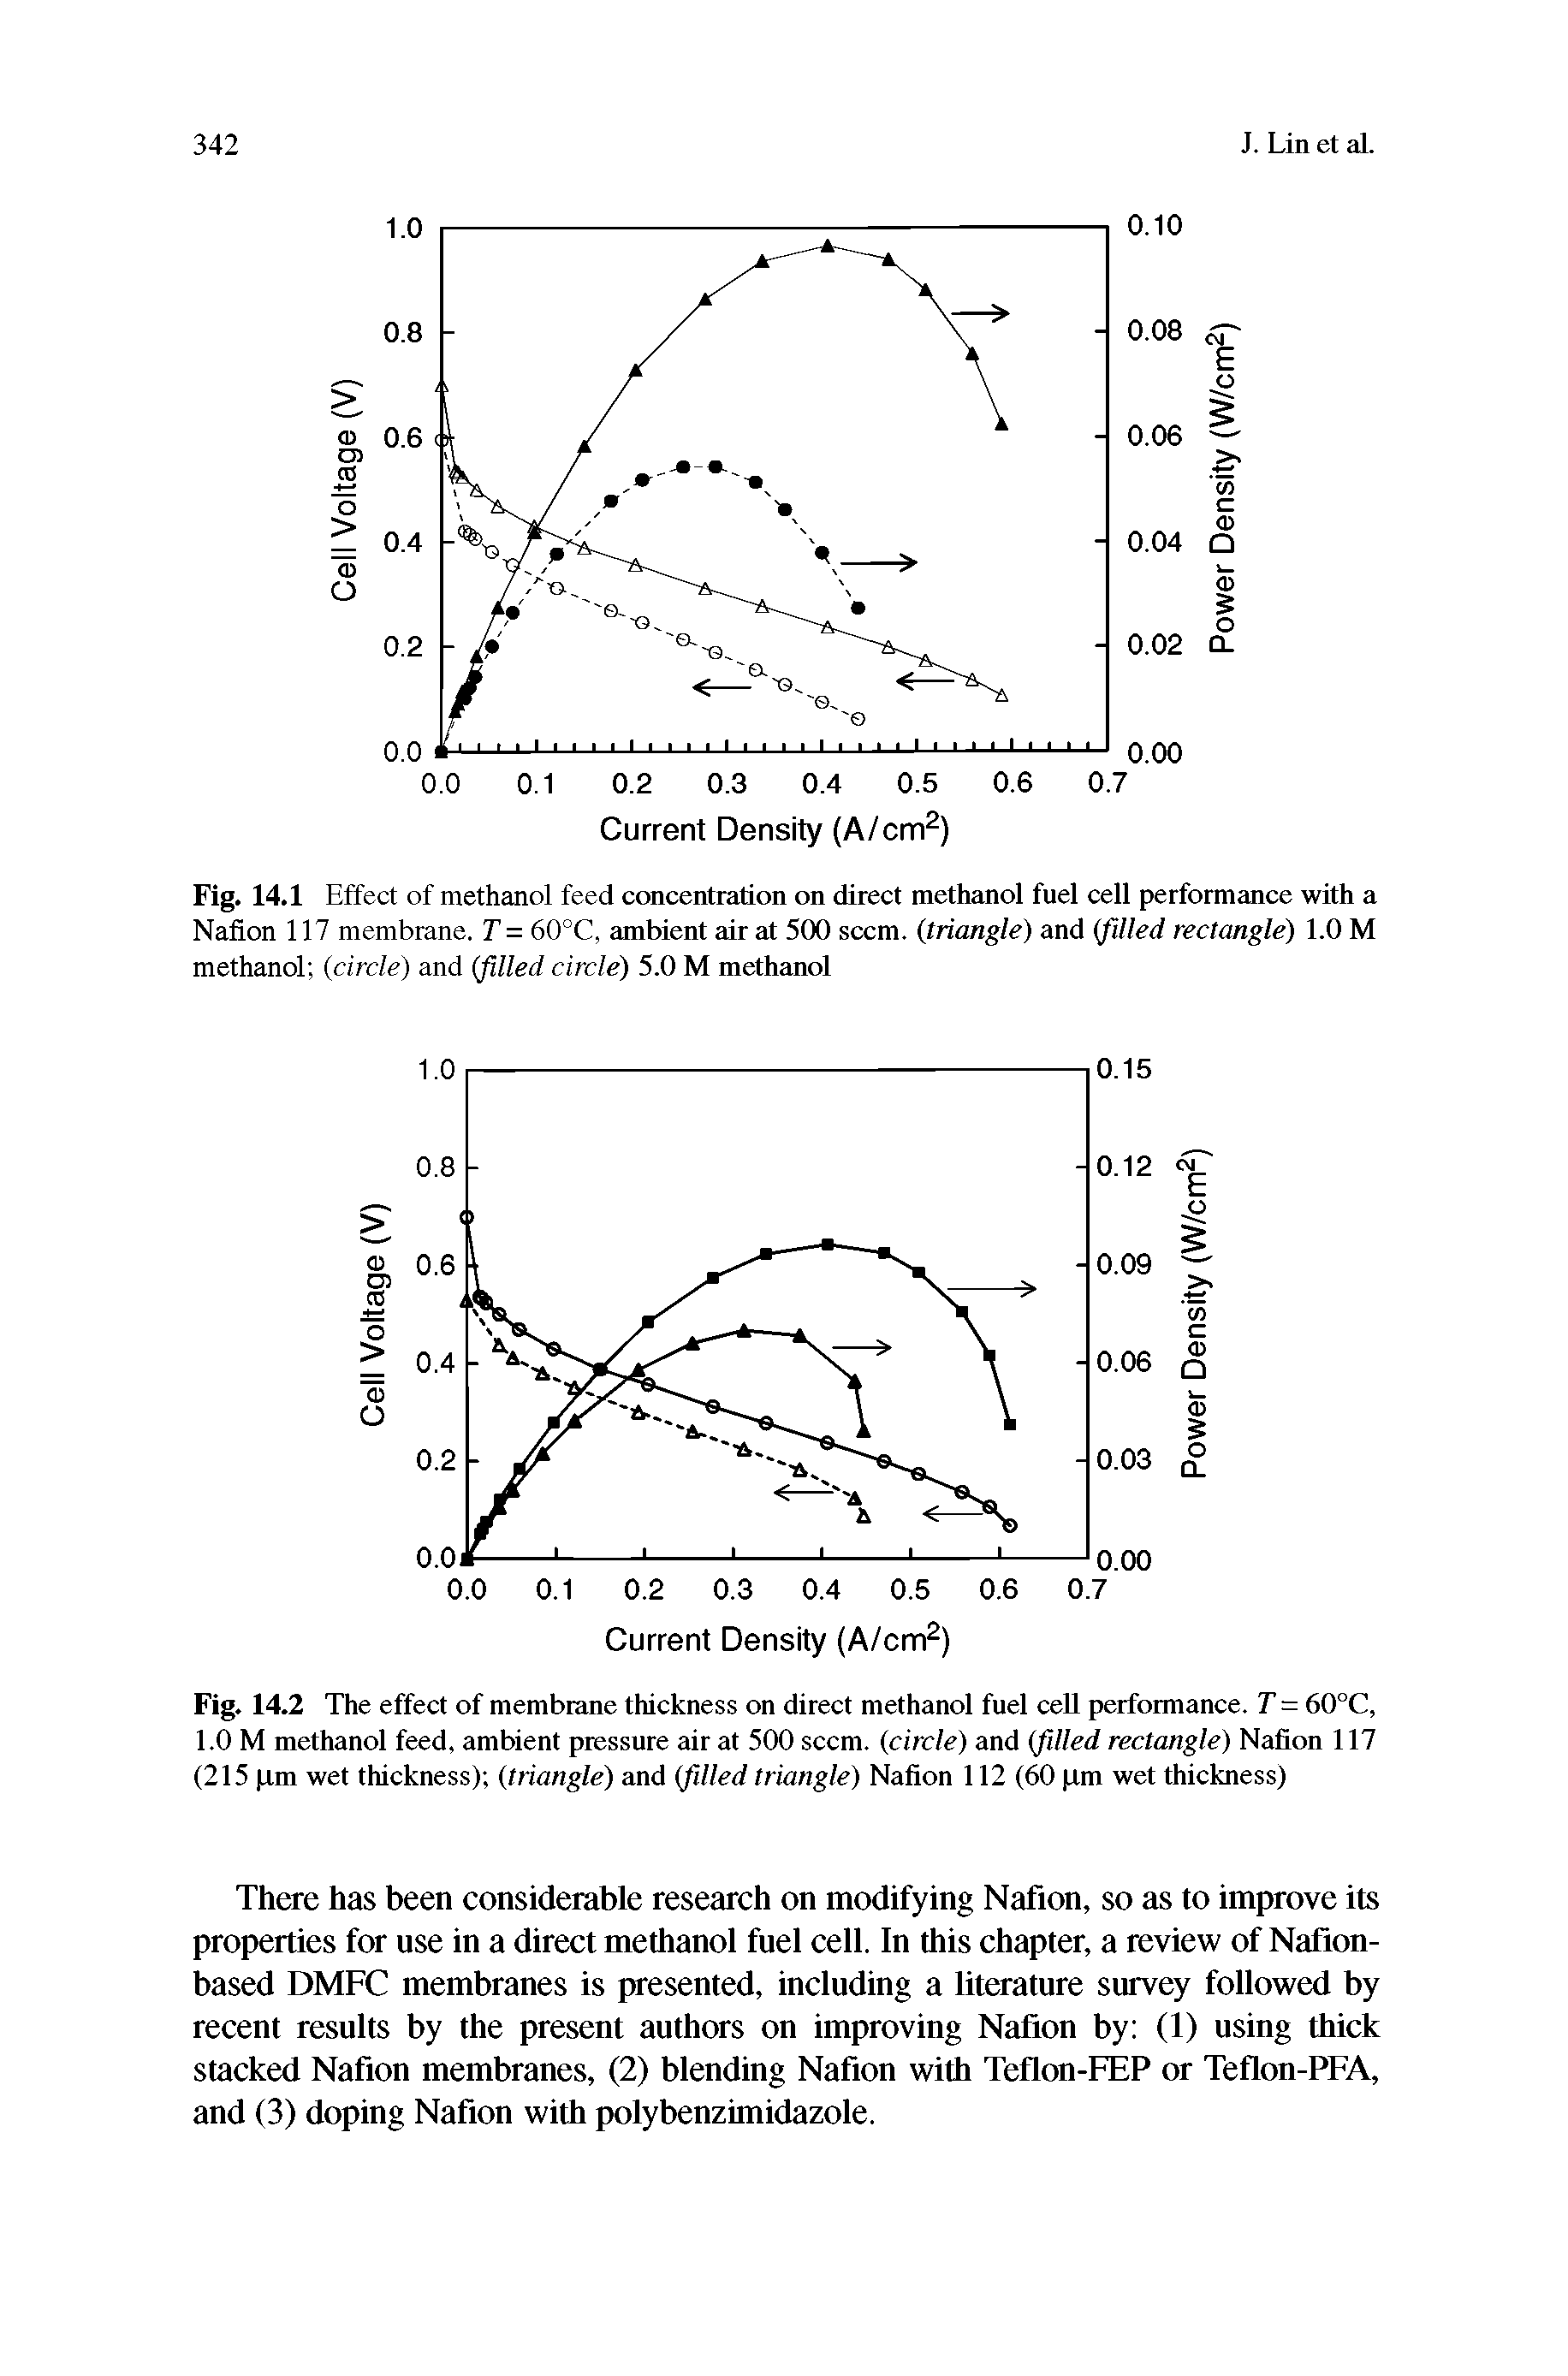 Fig. 14.2 The effect of membrane thickness on direct methanol fuel cell performance. T = 60°C, 1.0 M methanol feed, ambient pressure air at 500 seem, (circle) and (filled rectangle) Nafion 117 (215 pm wet thickness) (triangle) and (filled triangle) Nafion 112 (60 pm wet thickness)...